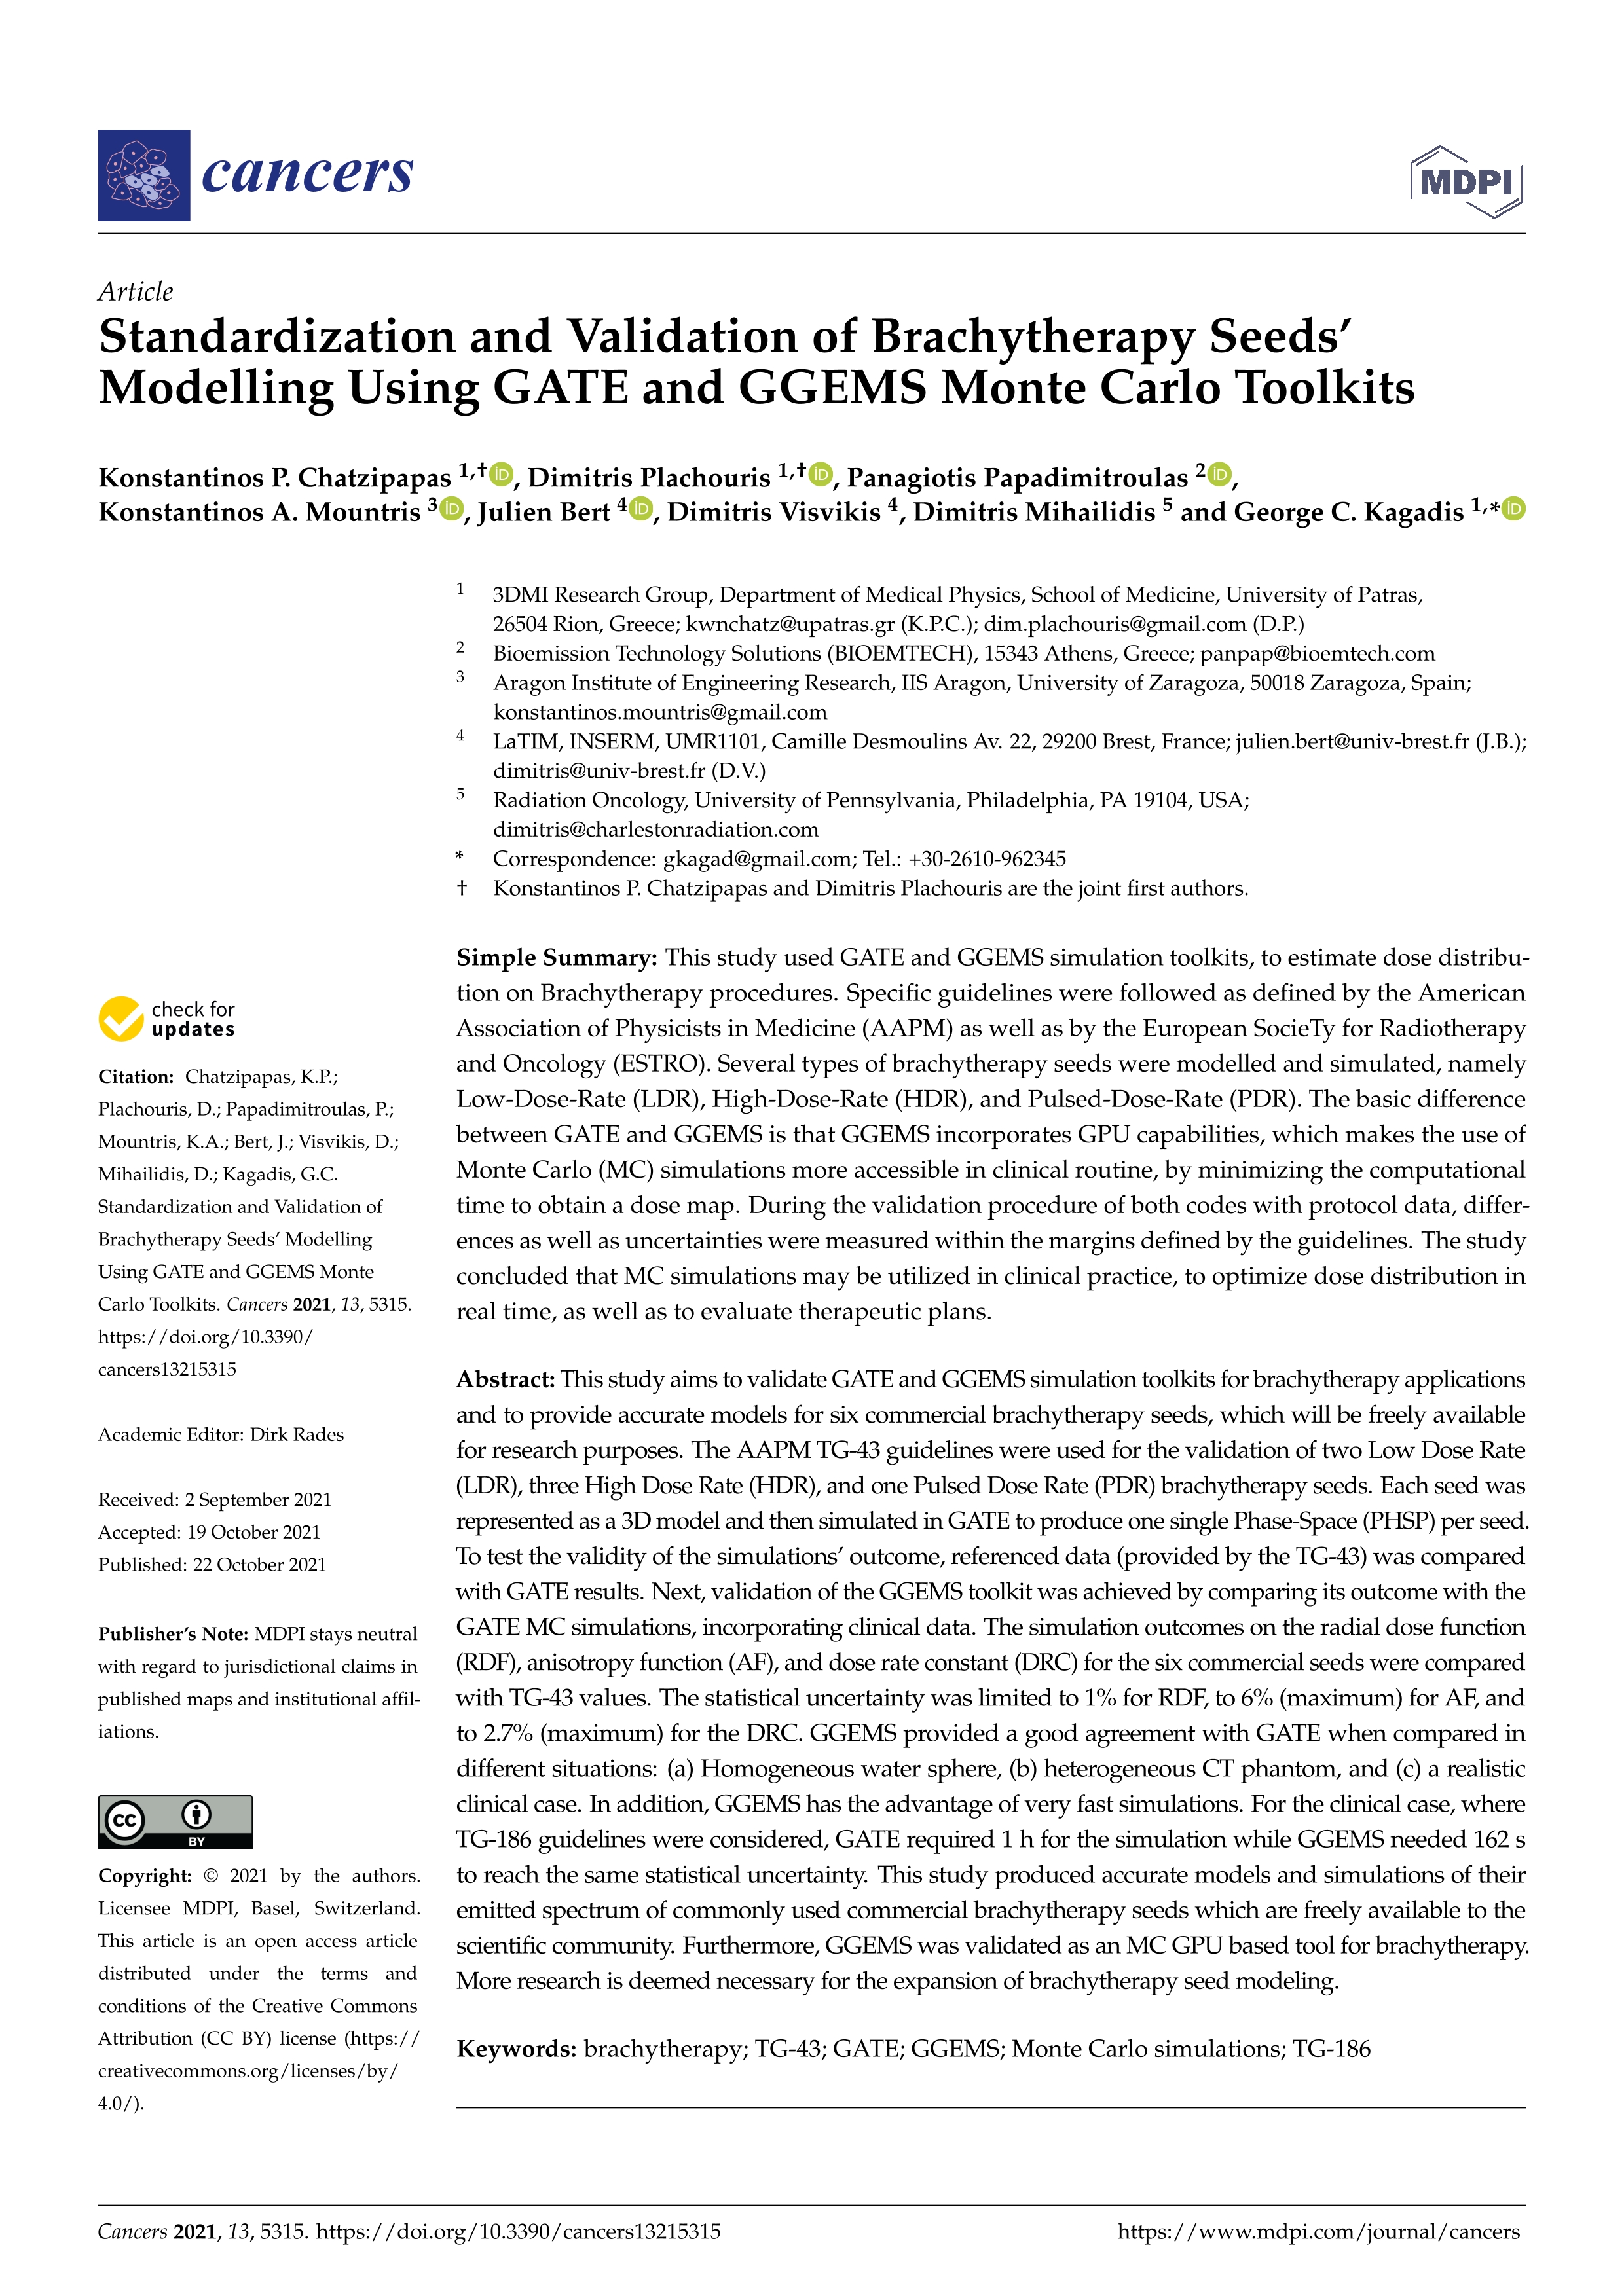 Standardization and Validation of Brachytherapy Seeds'' Modelling Using GATE and GGEMS Monte Carlo Toolkits